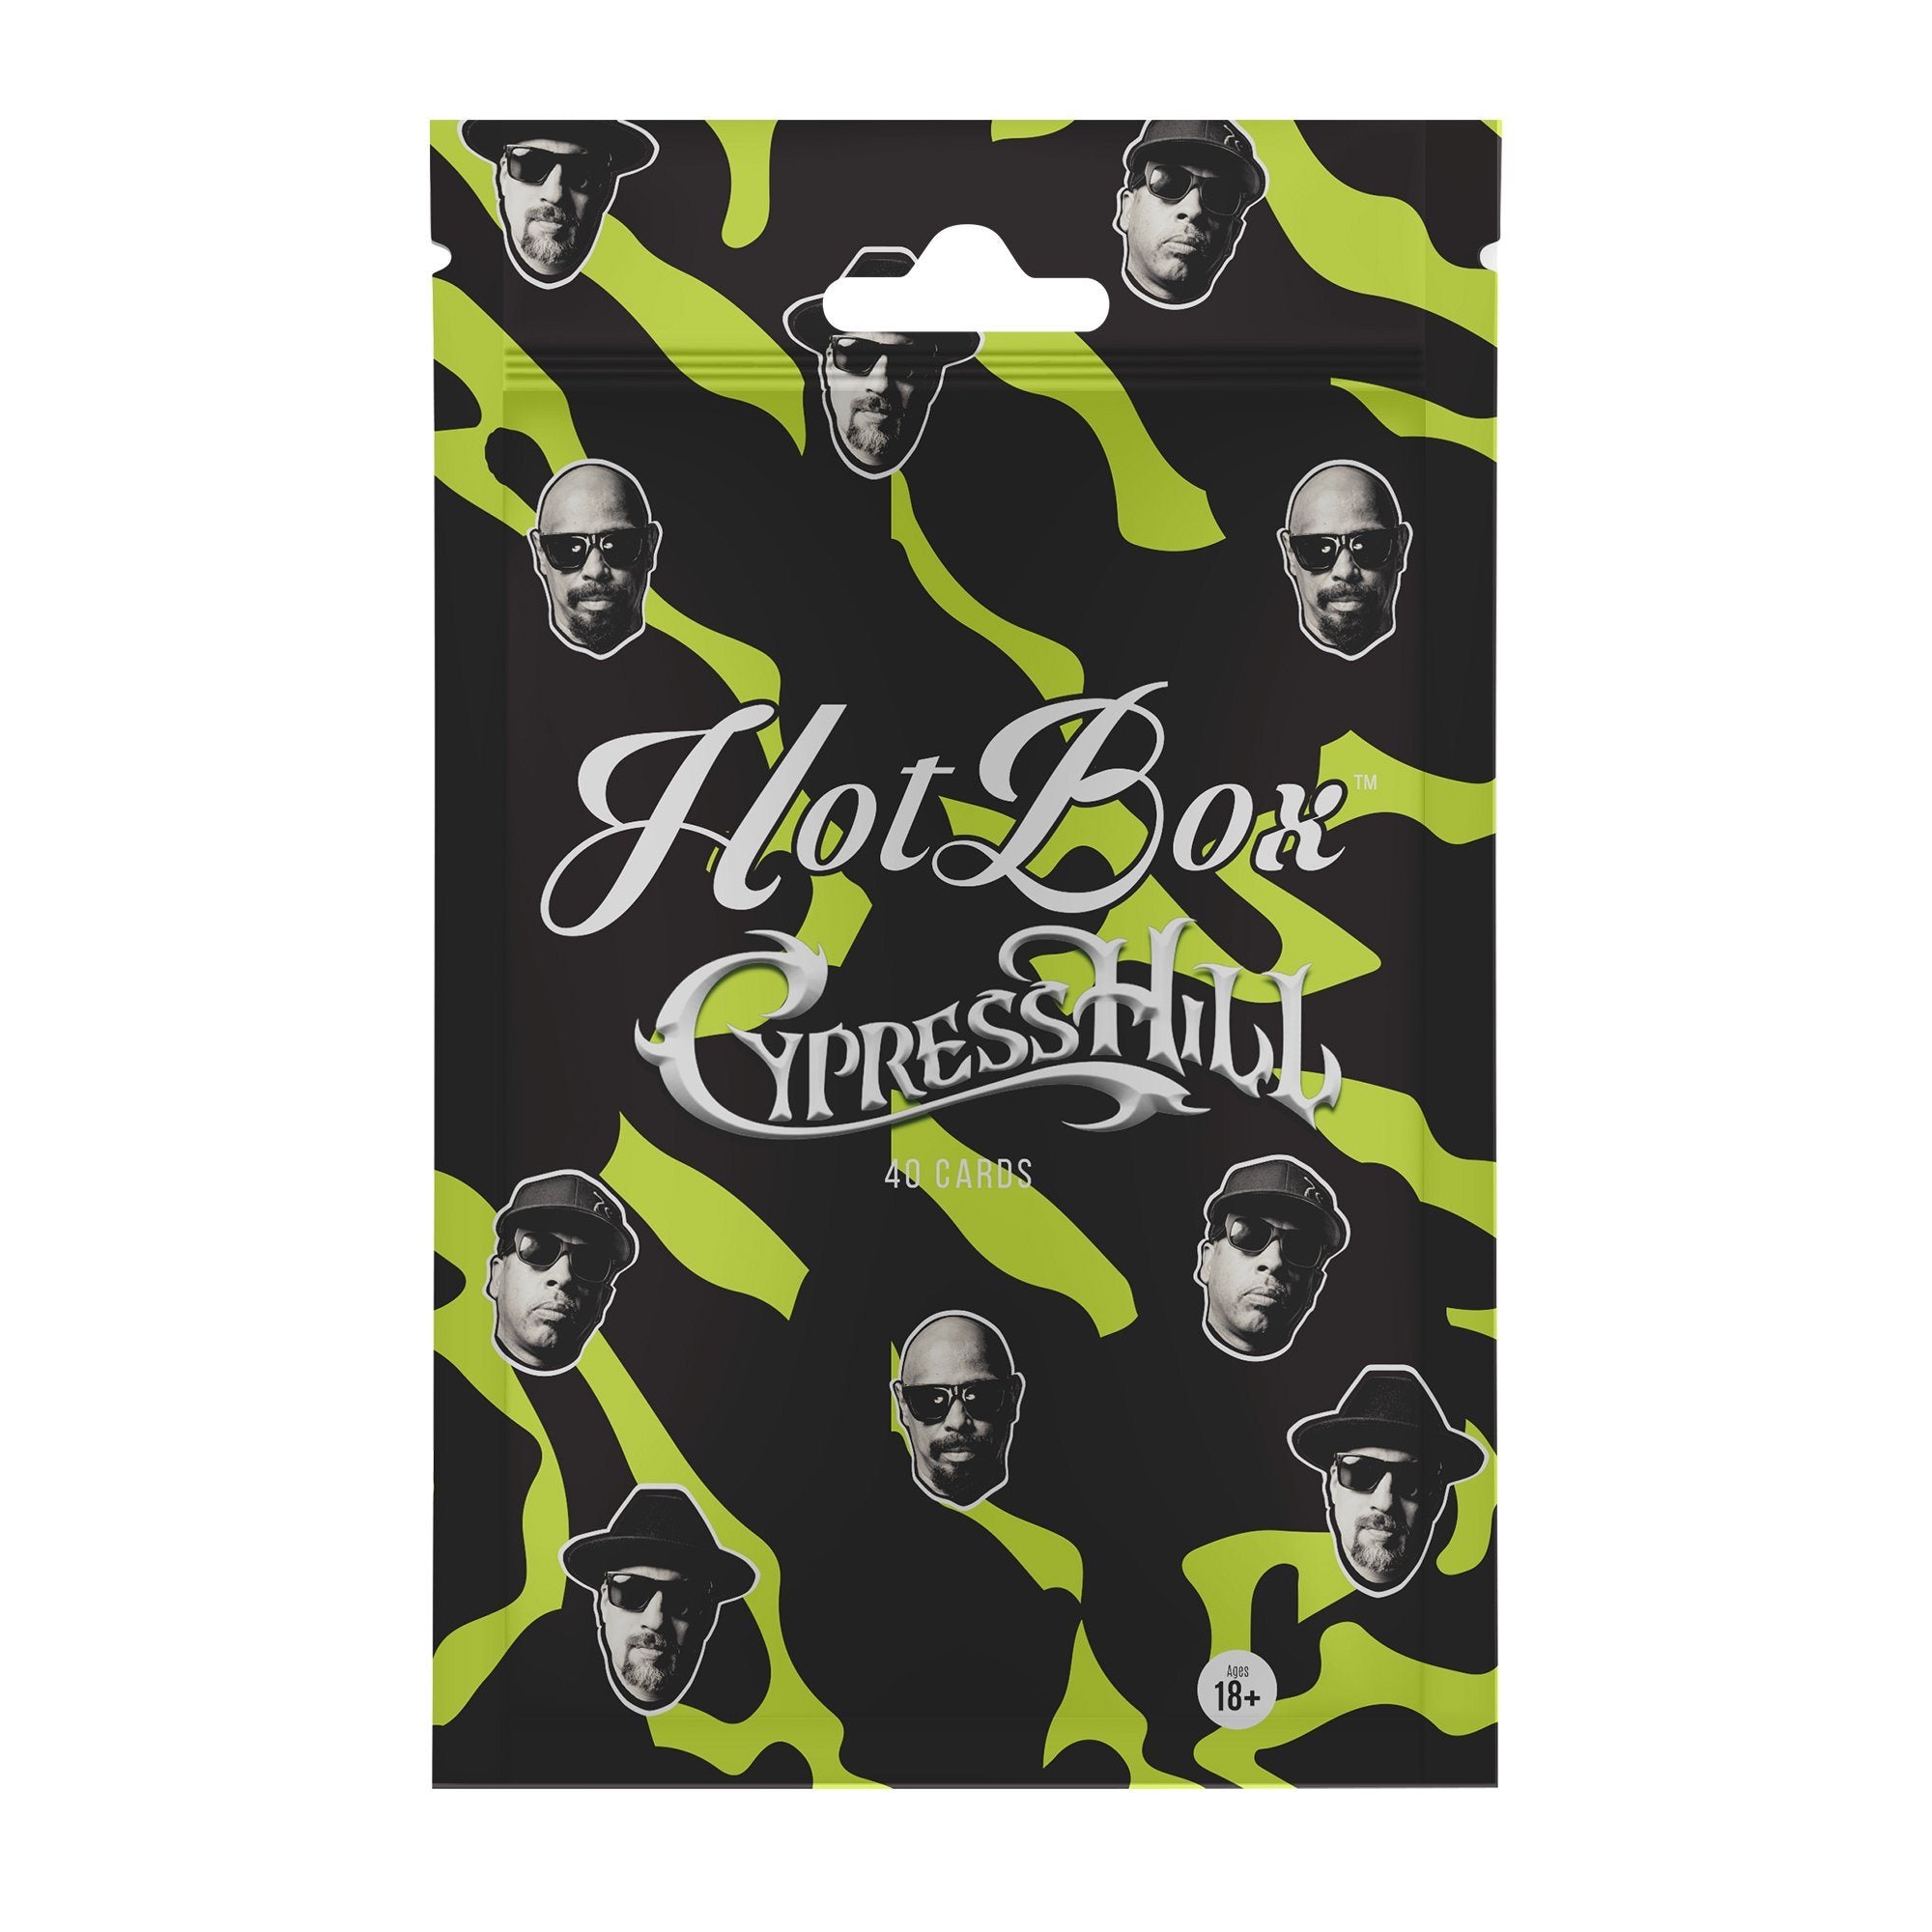 HotBox™ - Cypress Hill Expansion Pack